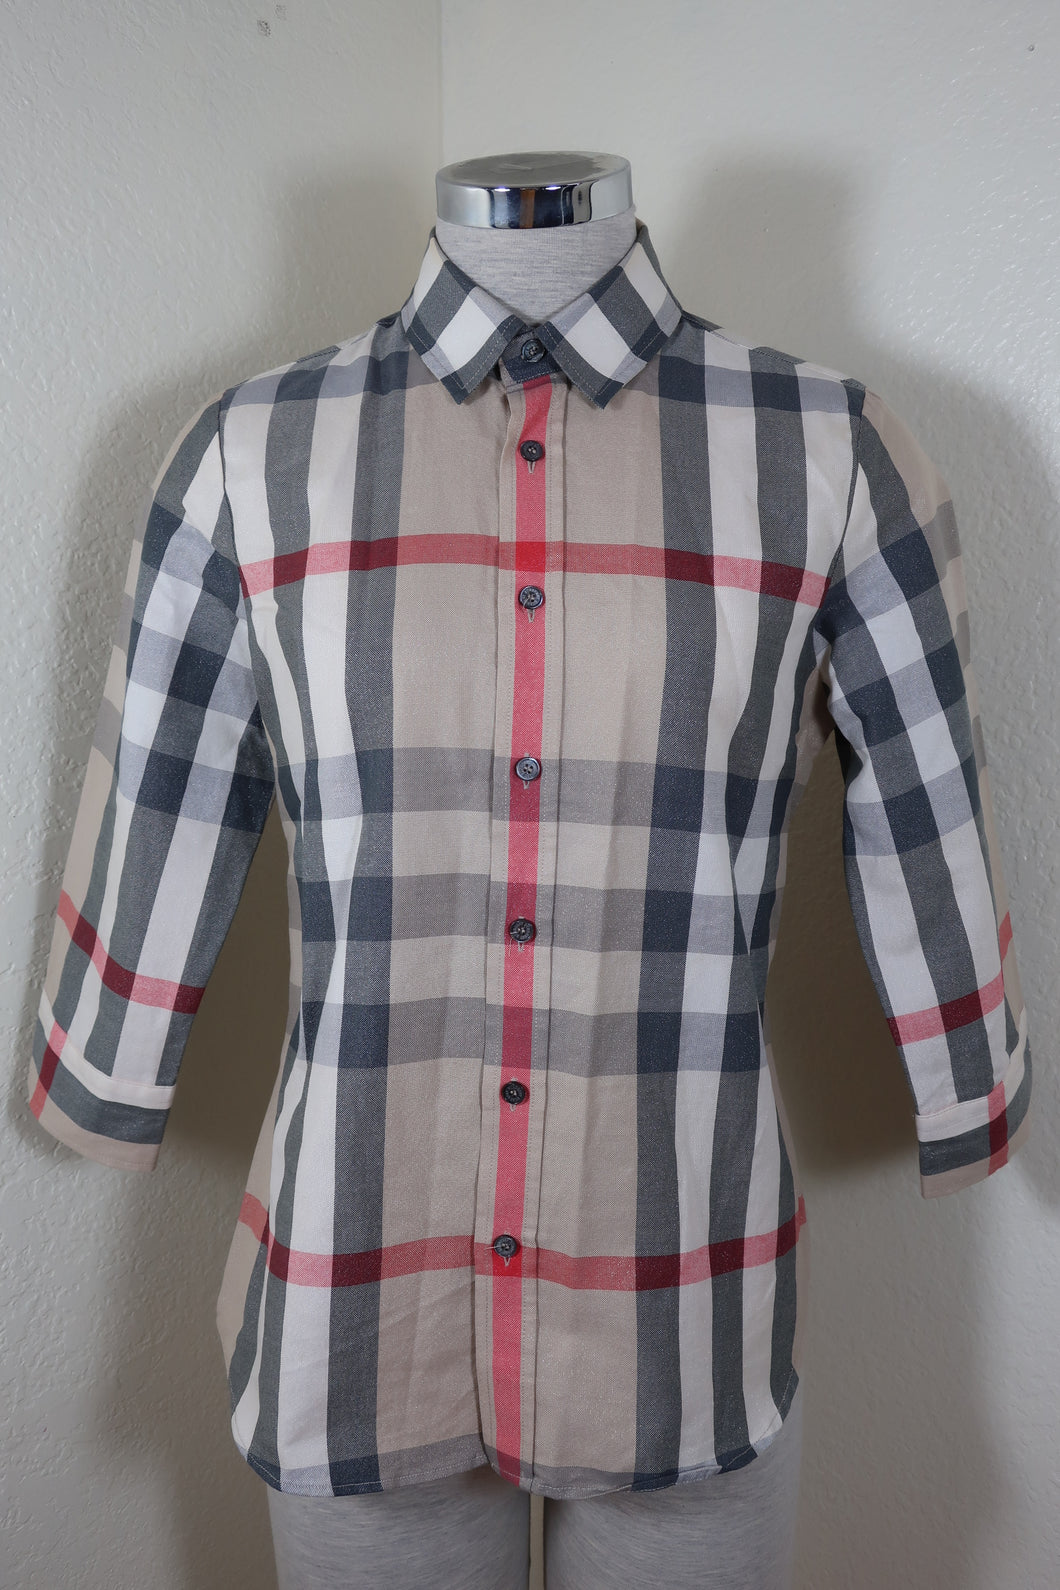 BURBERRY Classic Checks Small Cotton Plaid Button Collared Shirt Top Blouse Small 2 3 4